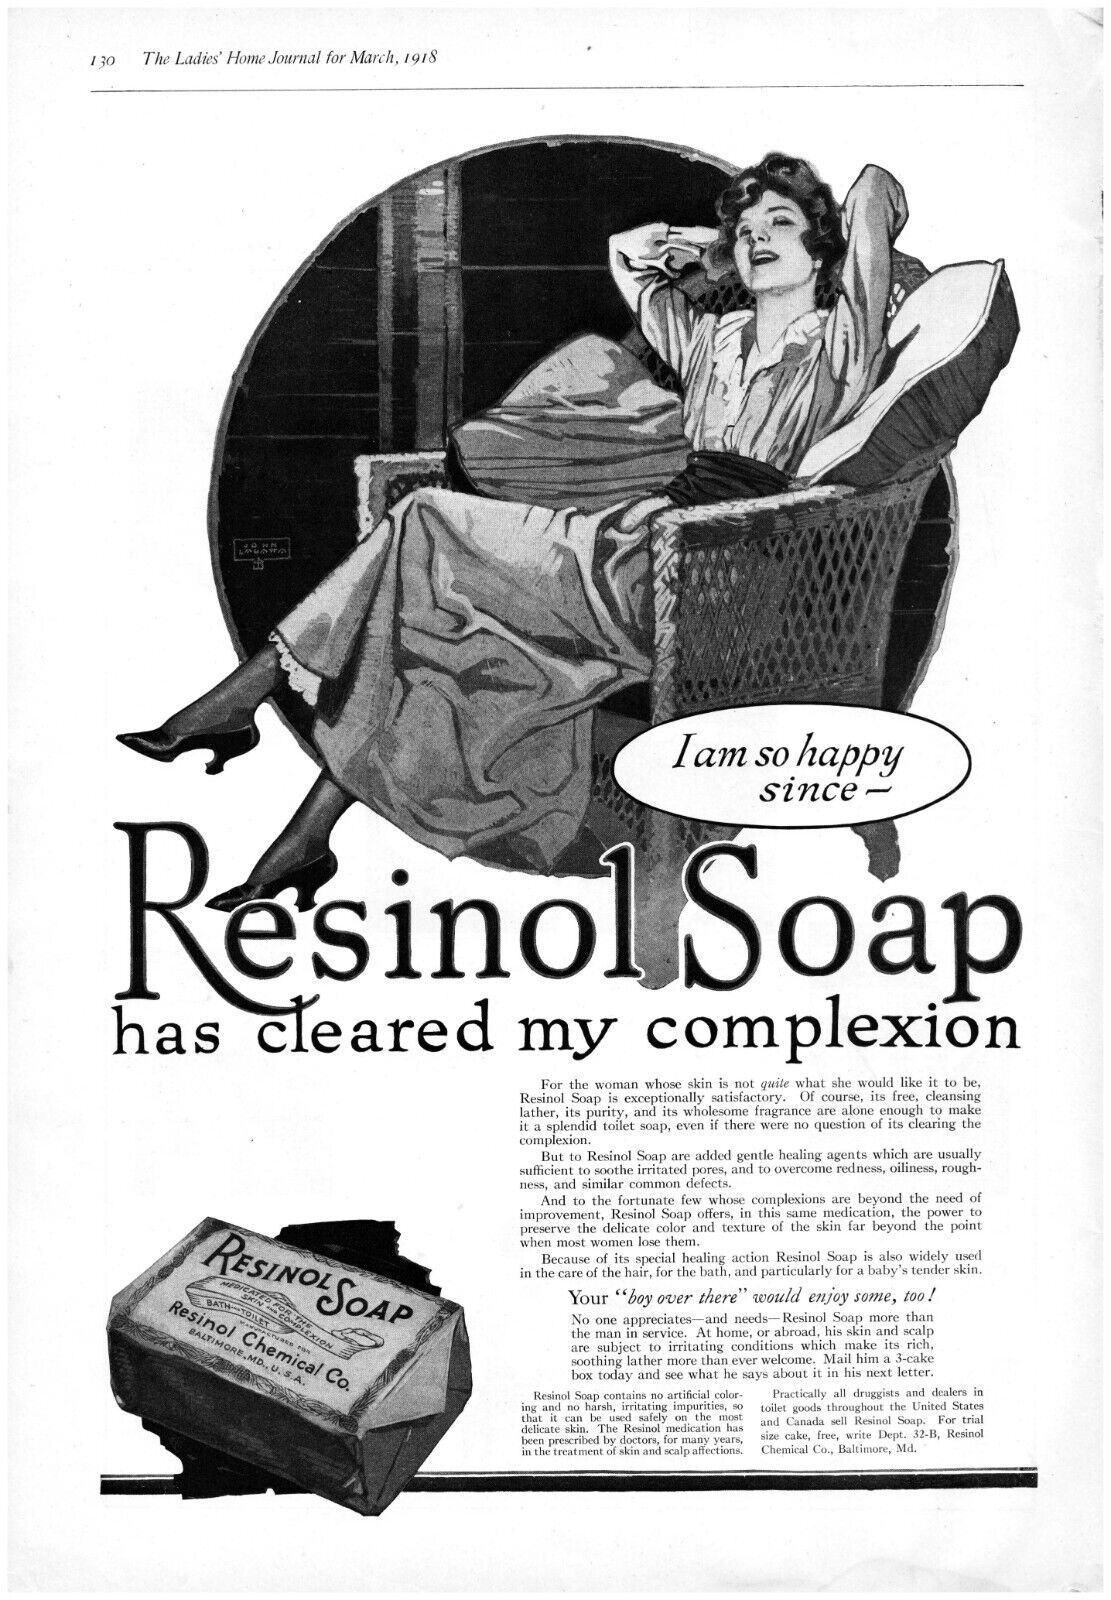 1918 Resinol Soap Antique Print Ad WW1 Era Cleared My Complexion Happy Woman 